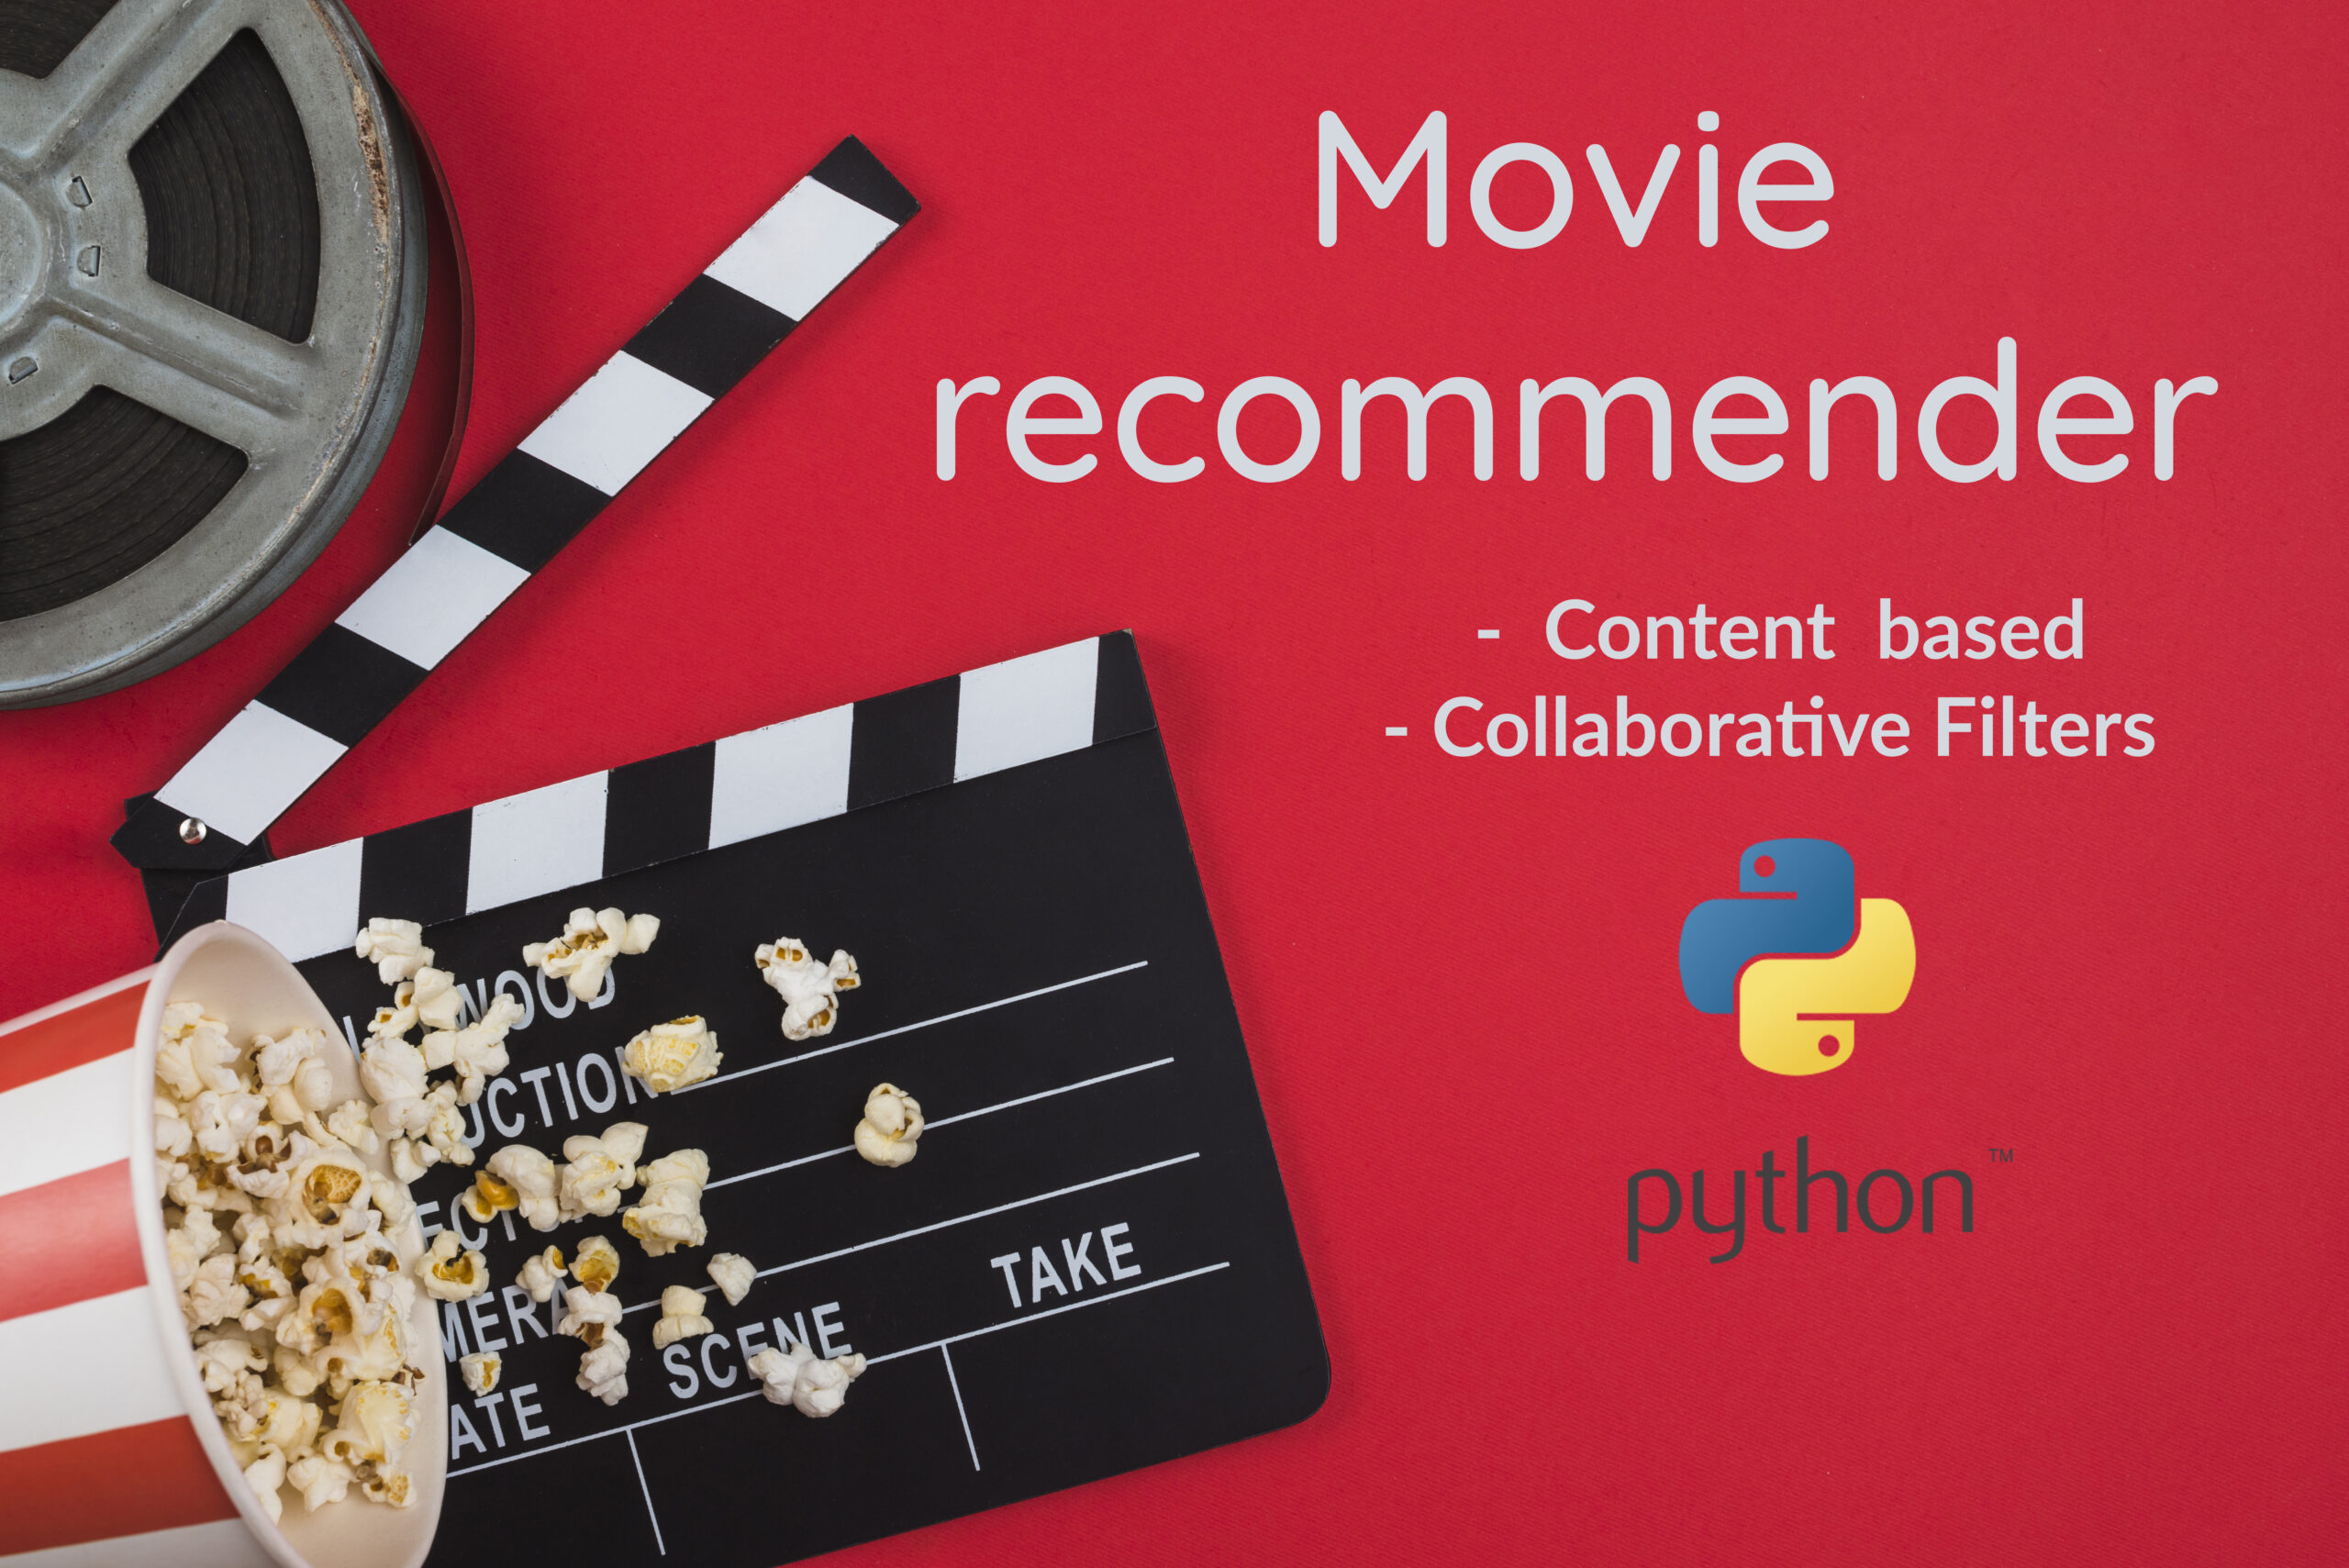 Movie recommender with Python